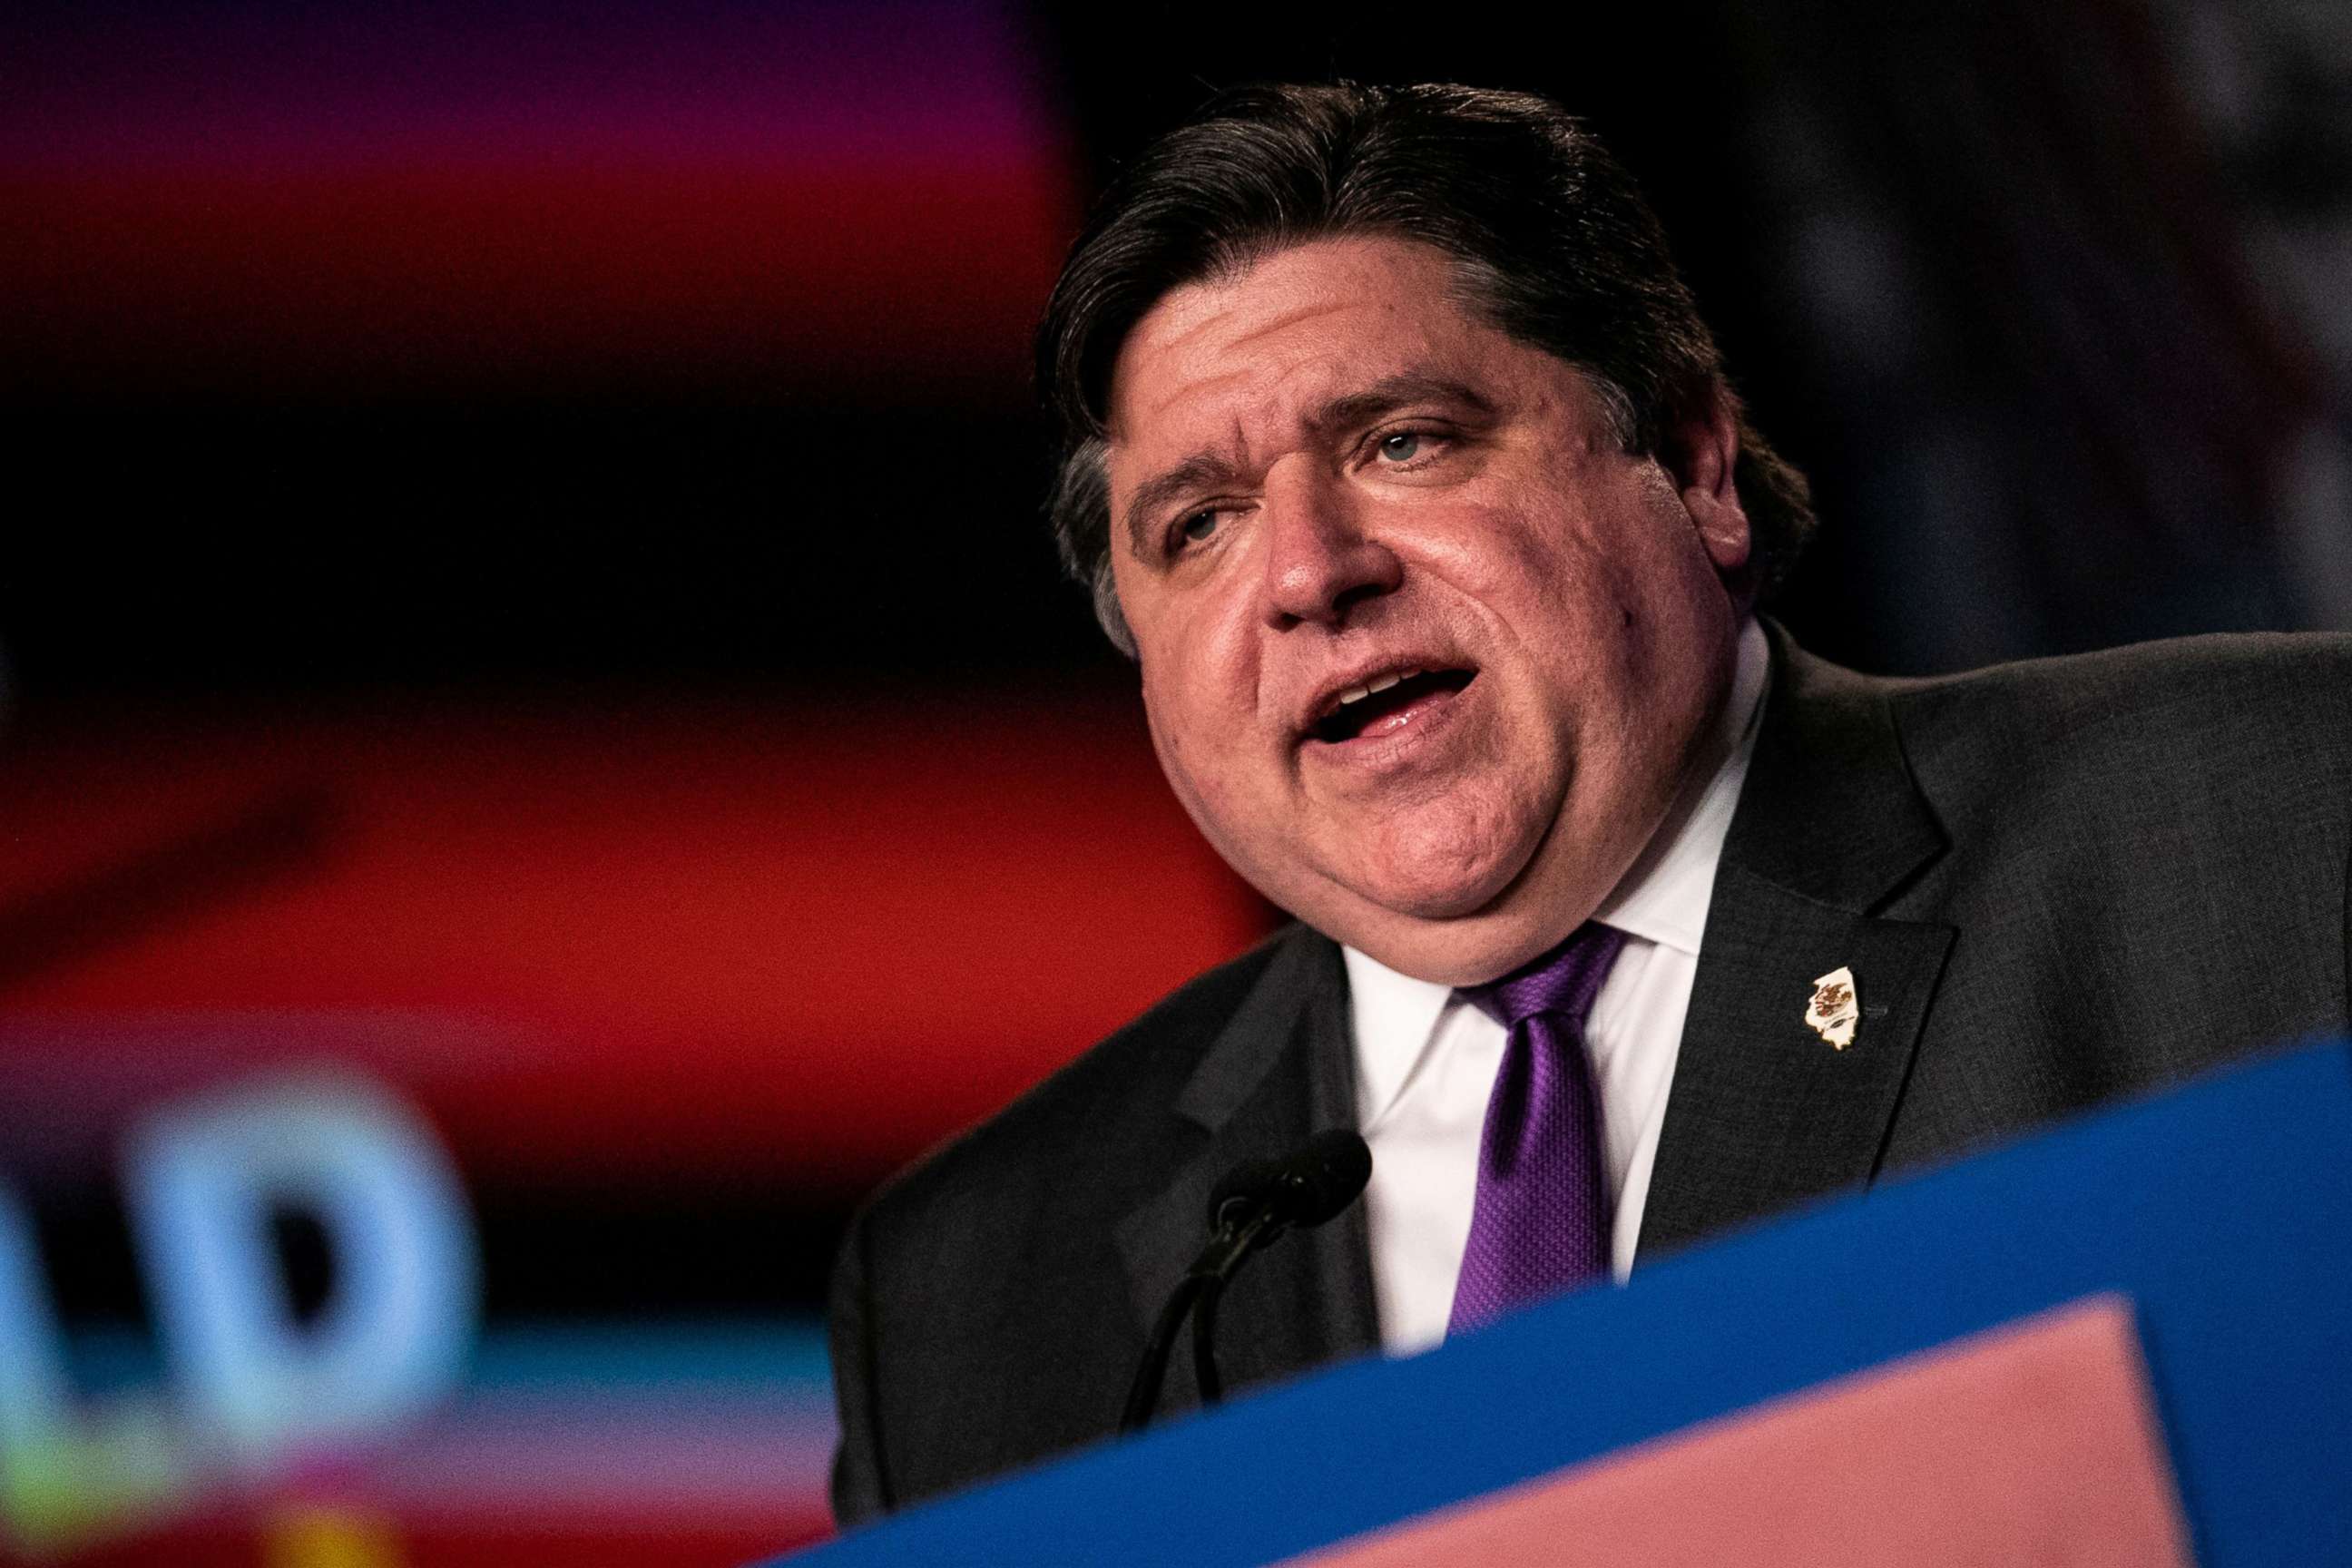 PHOTO: In this April 9, 2019, file photo, Illinois Governor J.B. Pritzker delivers remarks  in Washington, DC.